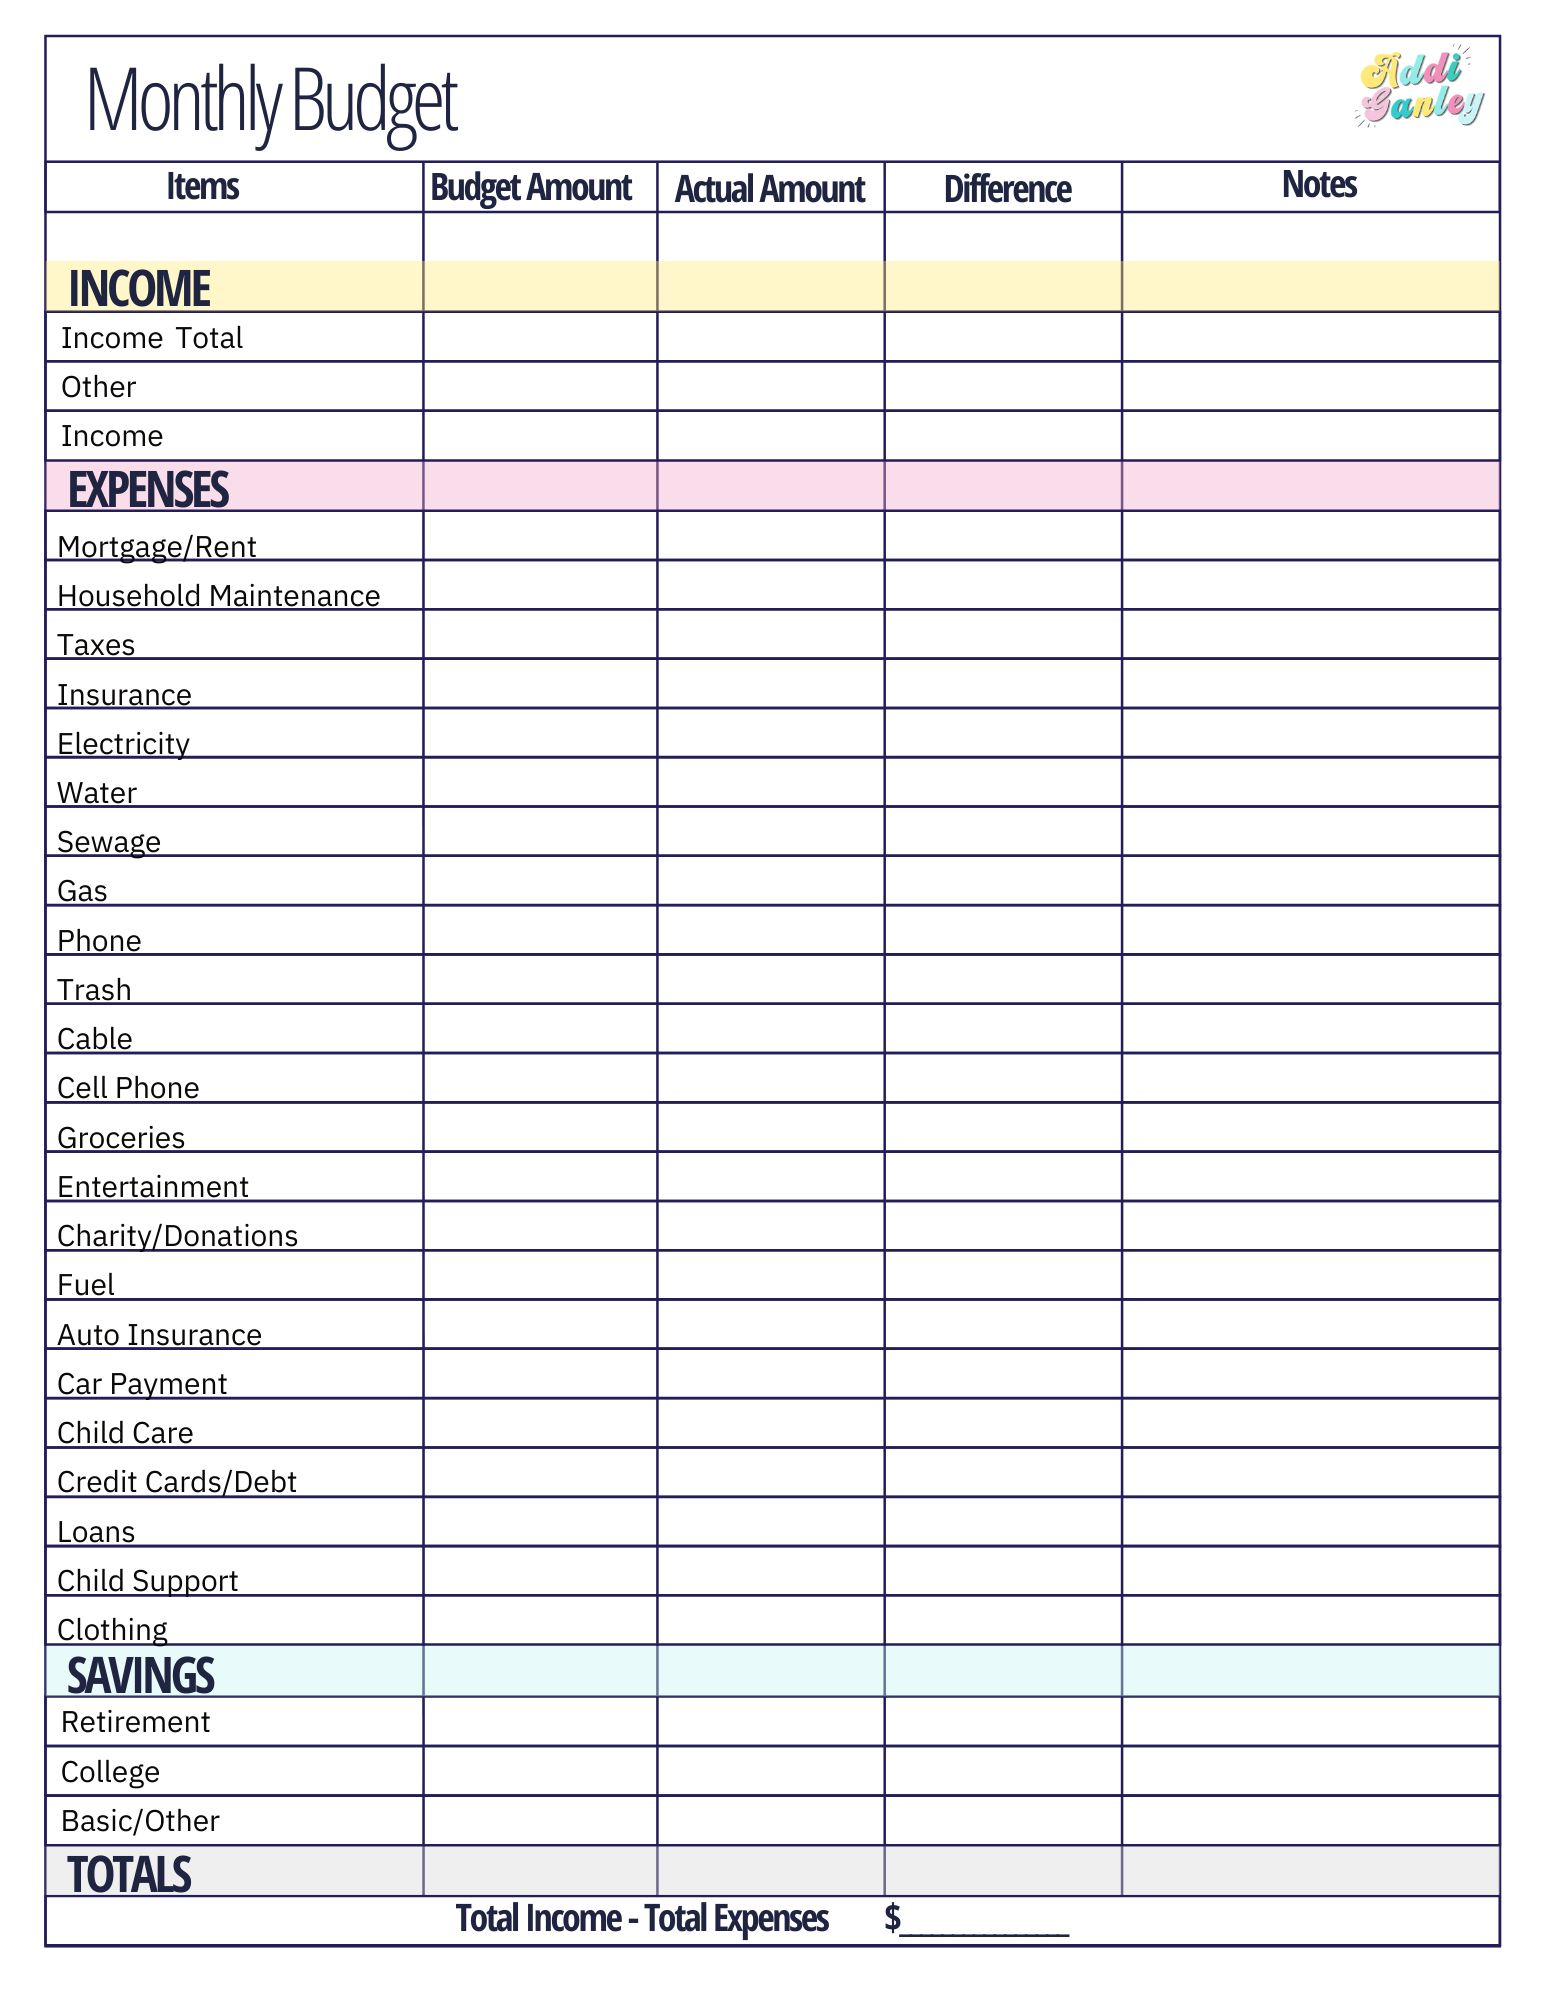 Free Monthly Budget Template - Instant Download inside Free Printable Monthly Household Budget Sheet